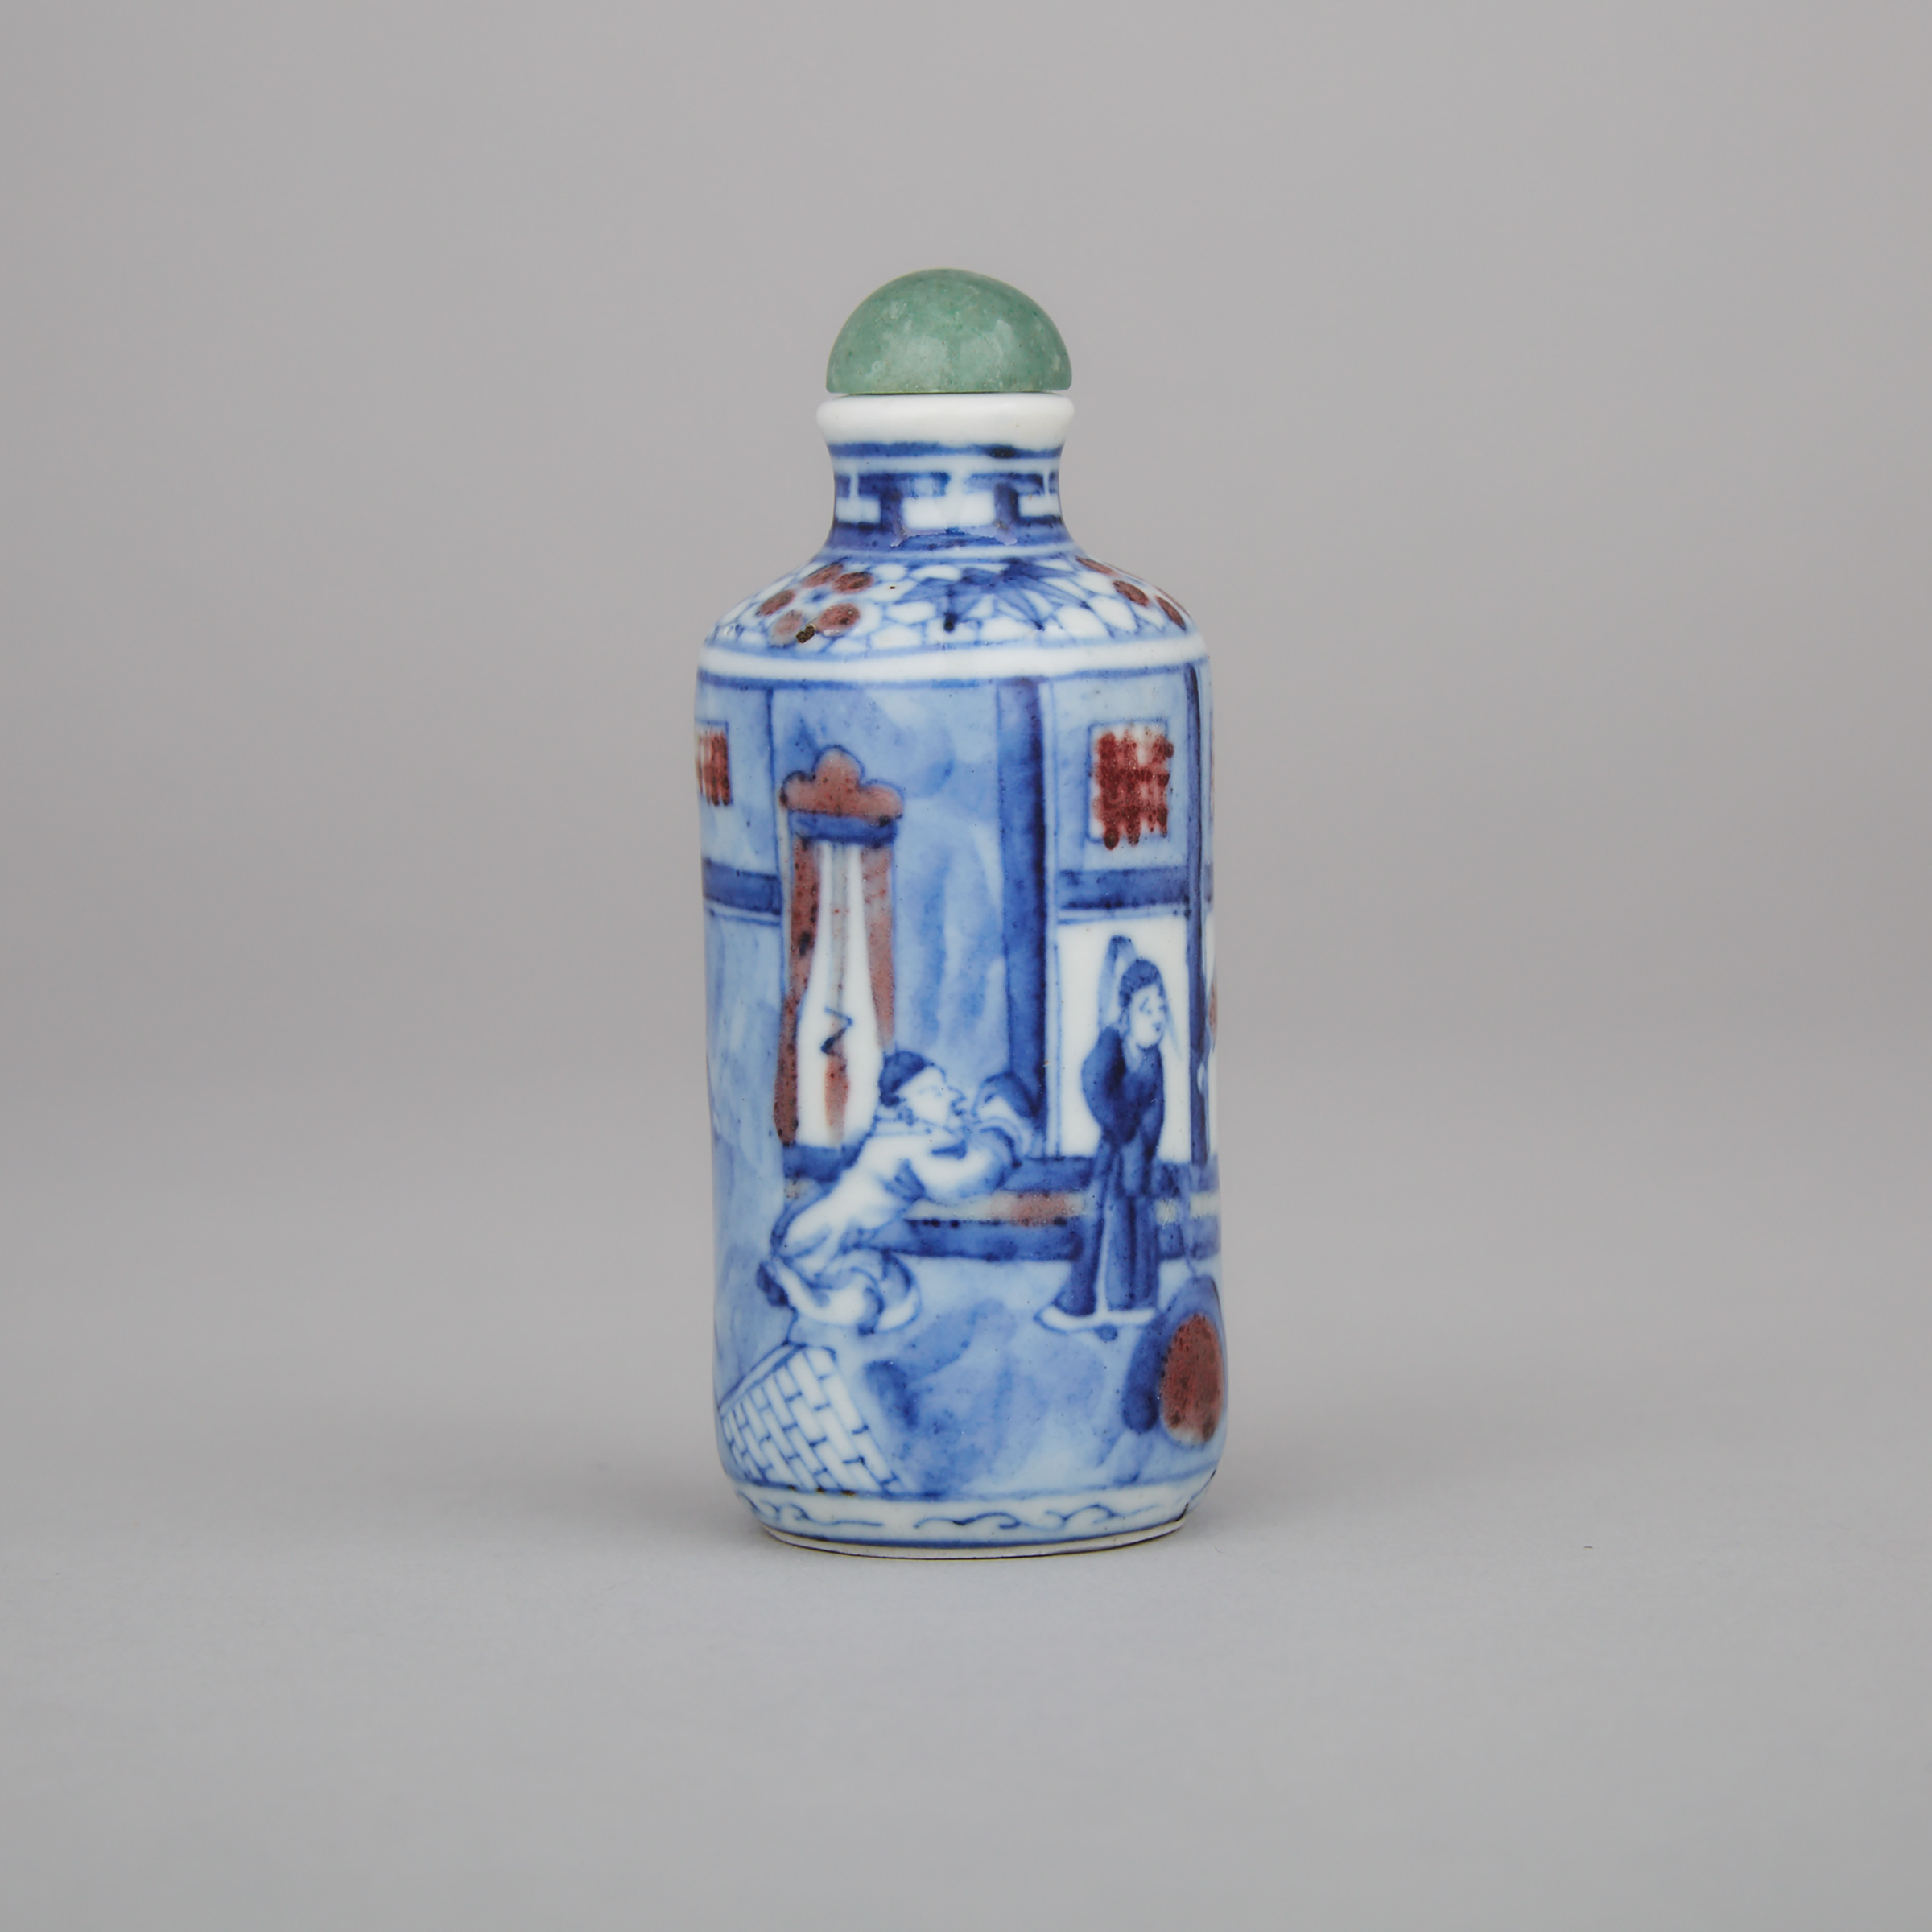 A Copper Red Blue and White Porcelain Snuff Bottle, Yongzheng Mark, 19th Century